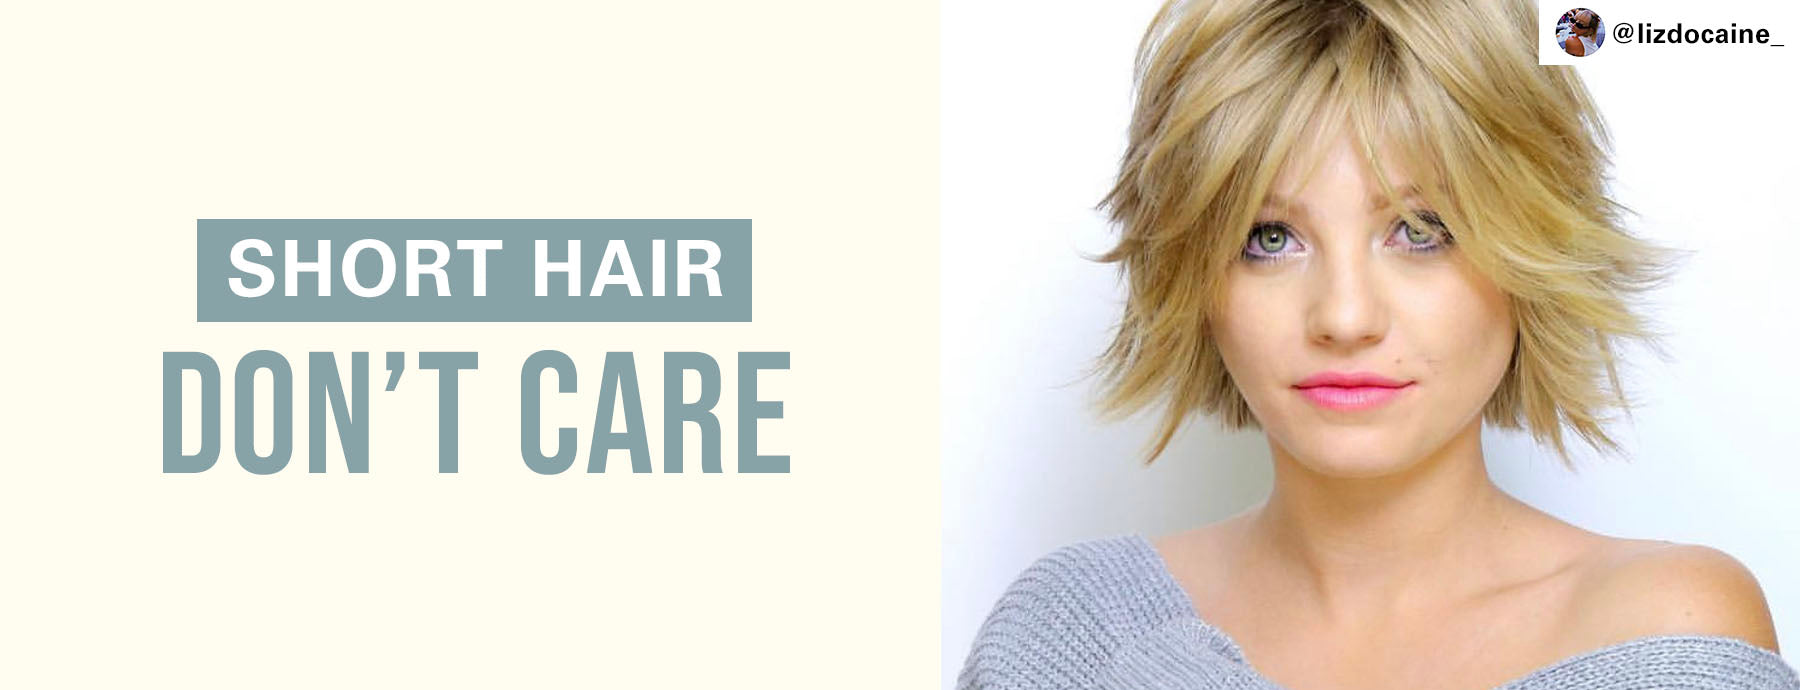 How Do I Know If I'll Look Good With a Short Haircut? – Color Wow